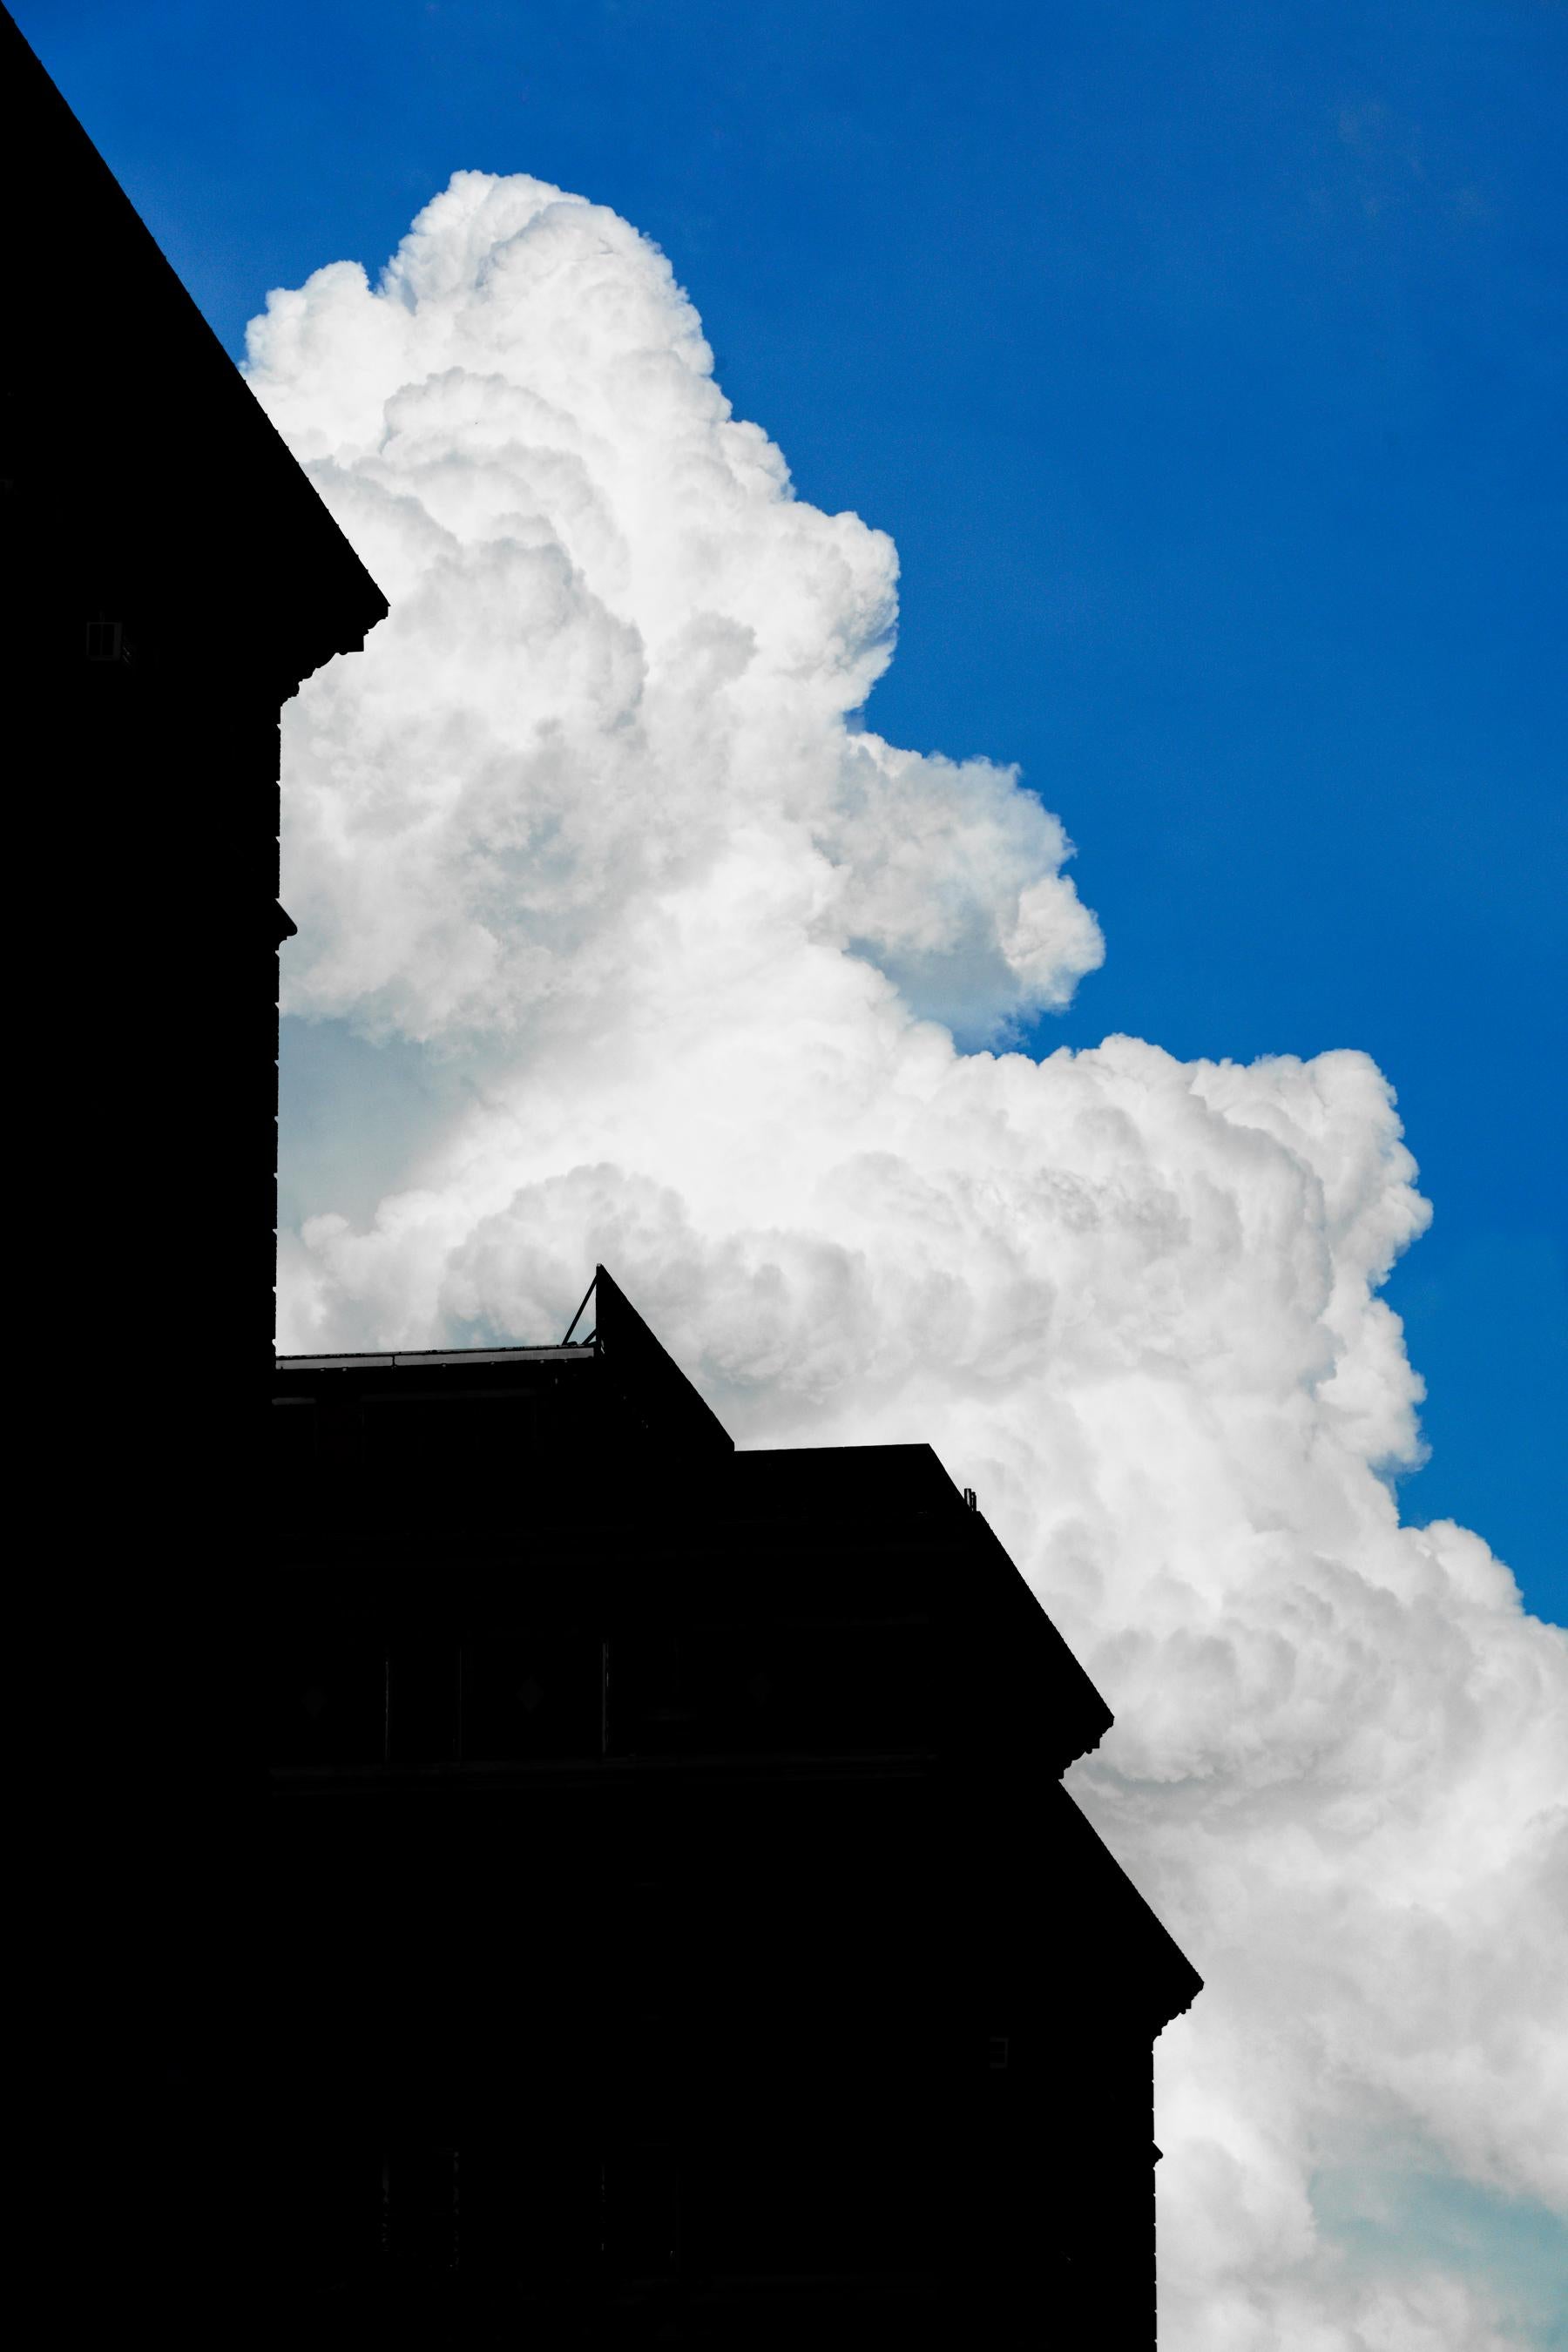 "Building With Cloud #2", photography, city, architecture, white cloud, blue sky